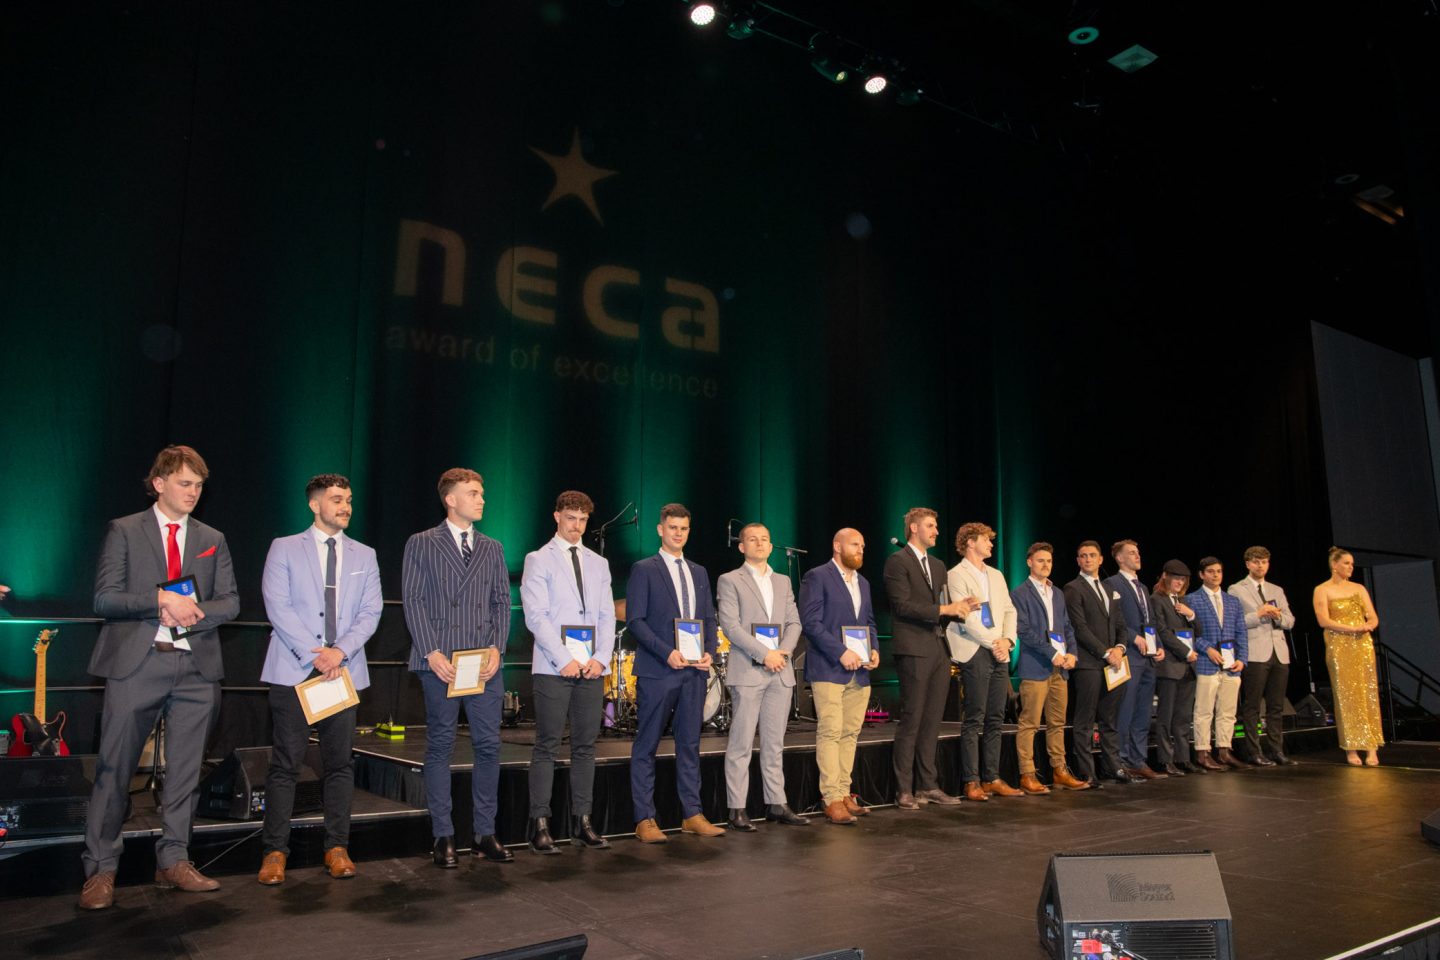 NECA award finalists electrical apprenticeships adelaide on stage